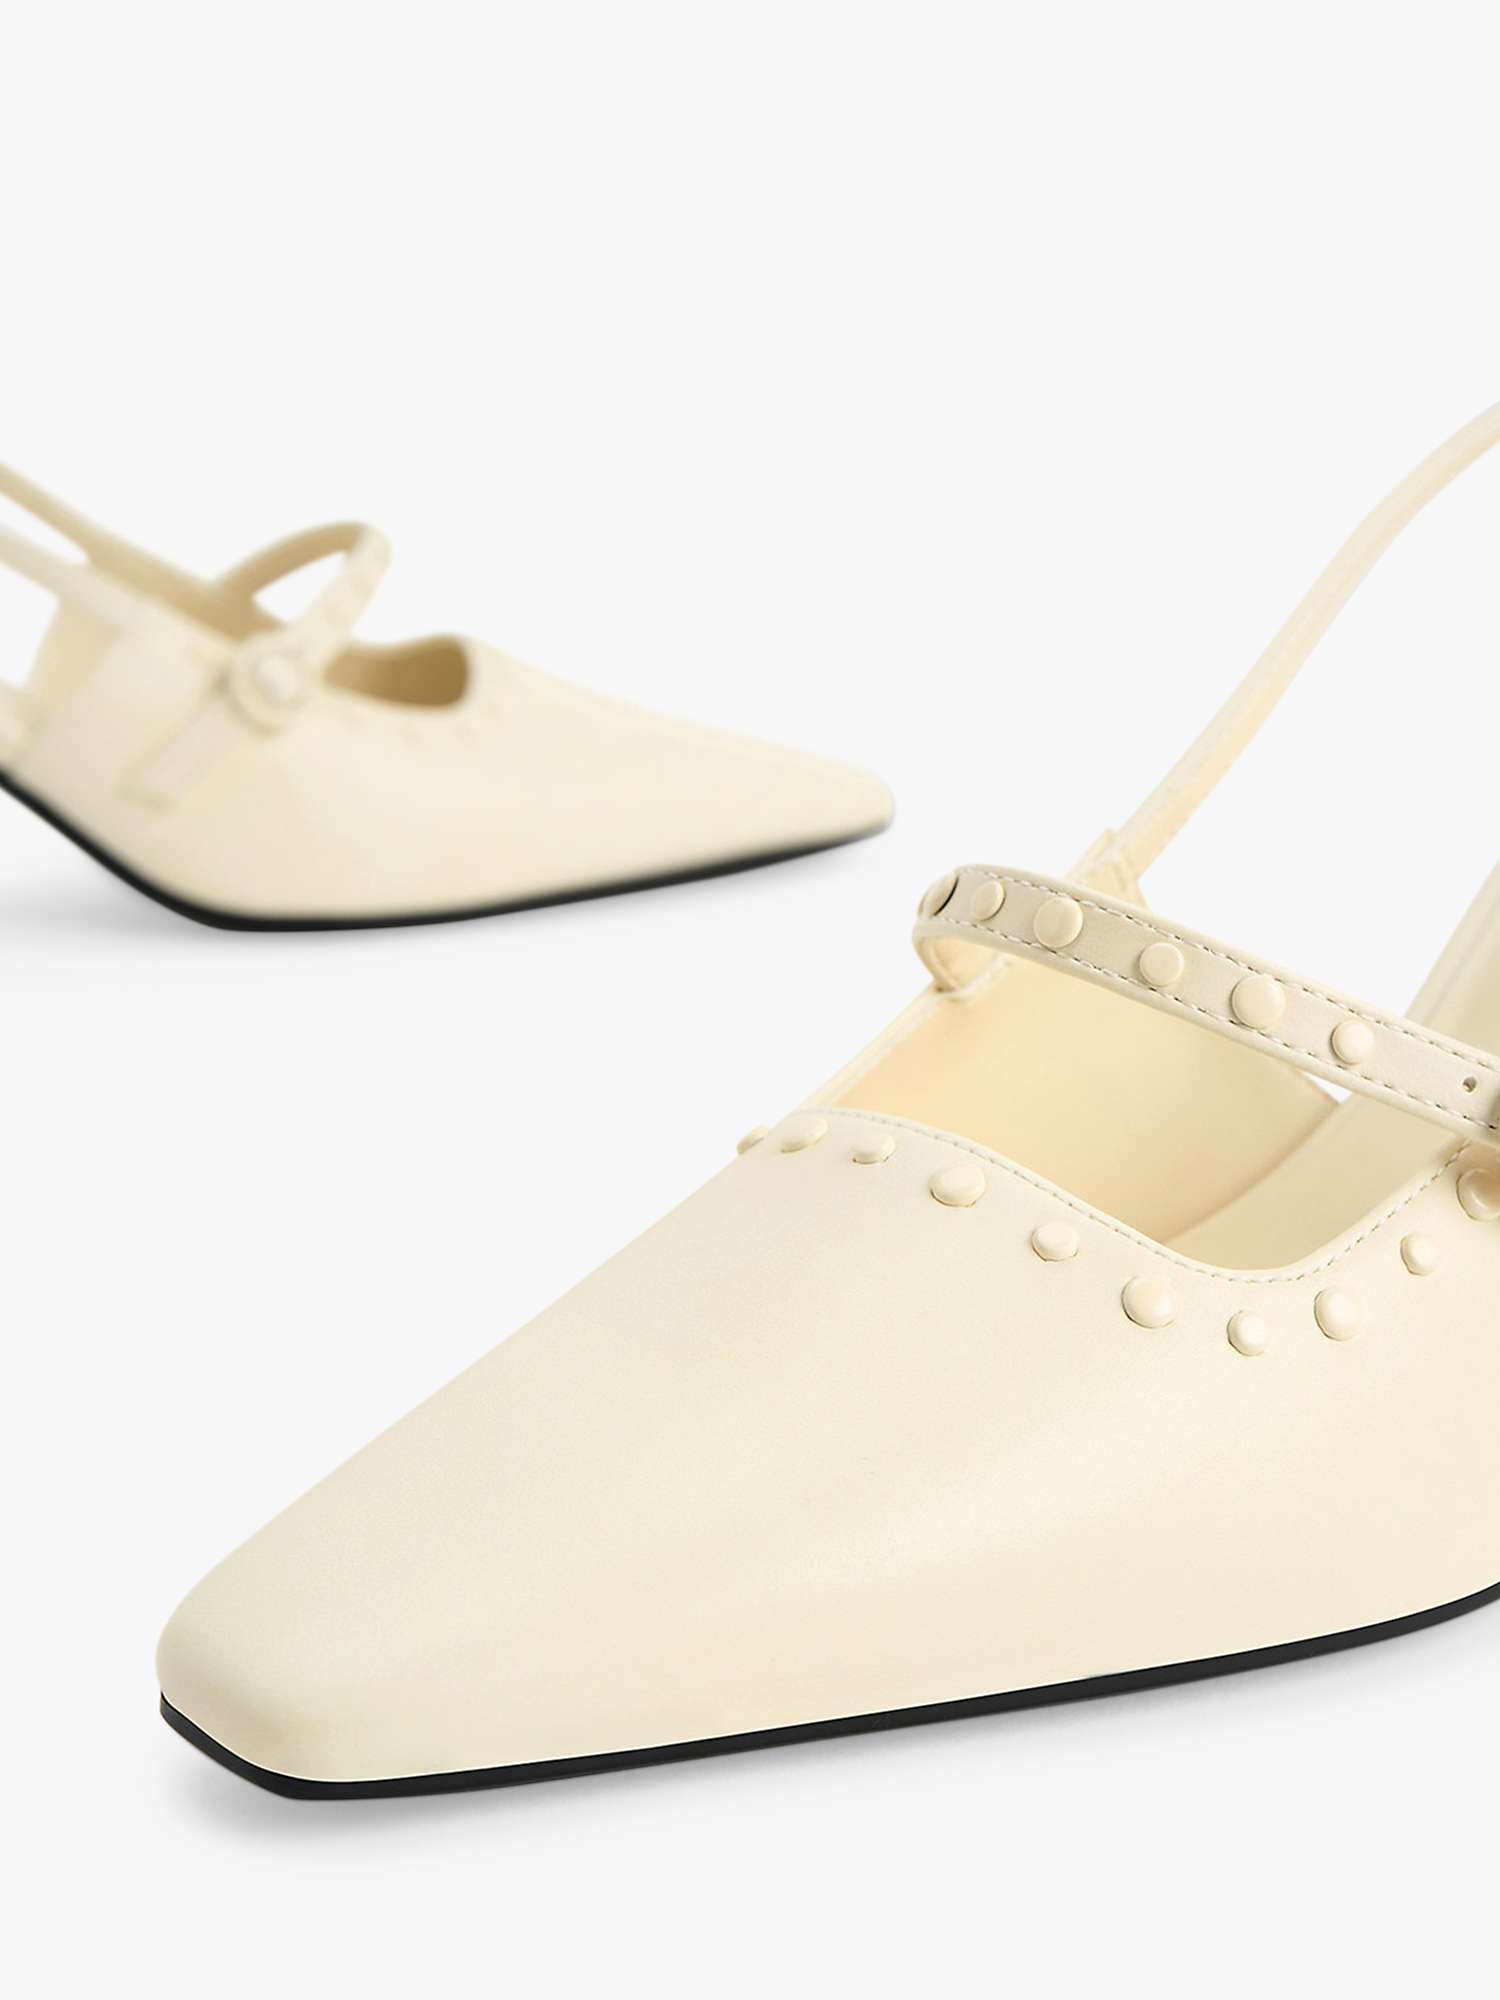 Buy CHARLES & KEITH Studded Slingback Court Shoes, Chalk Online at johnlewis.com